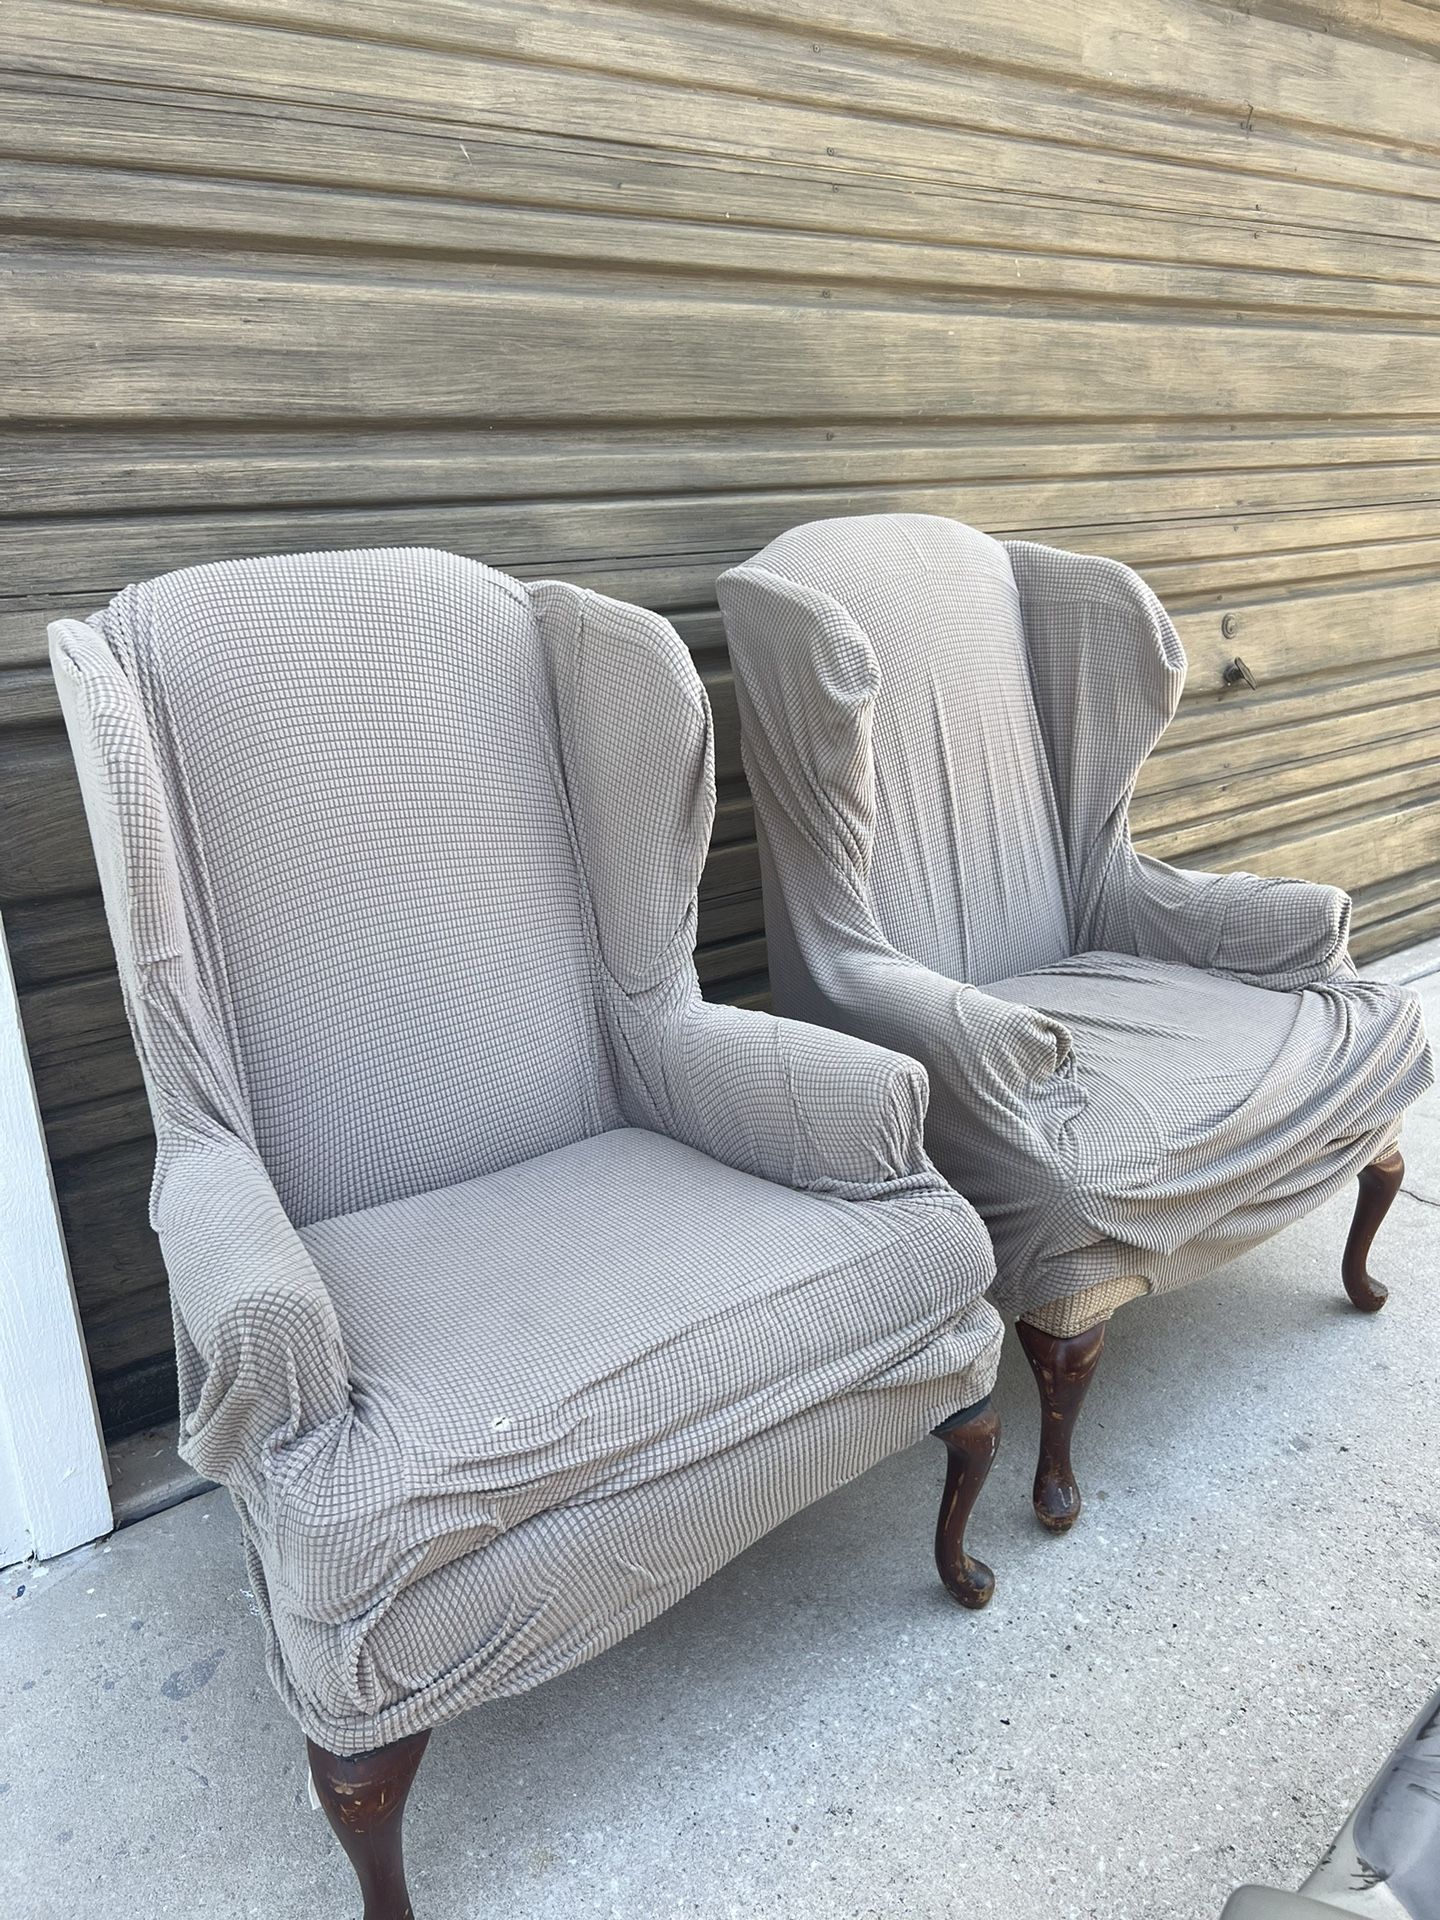 Chairs With Covers 20.00